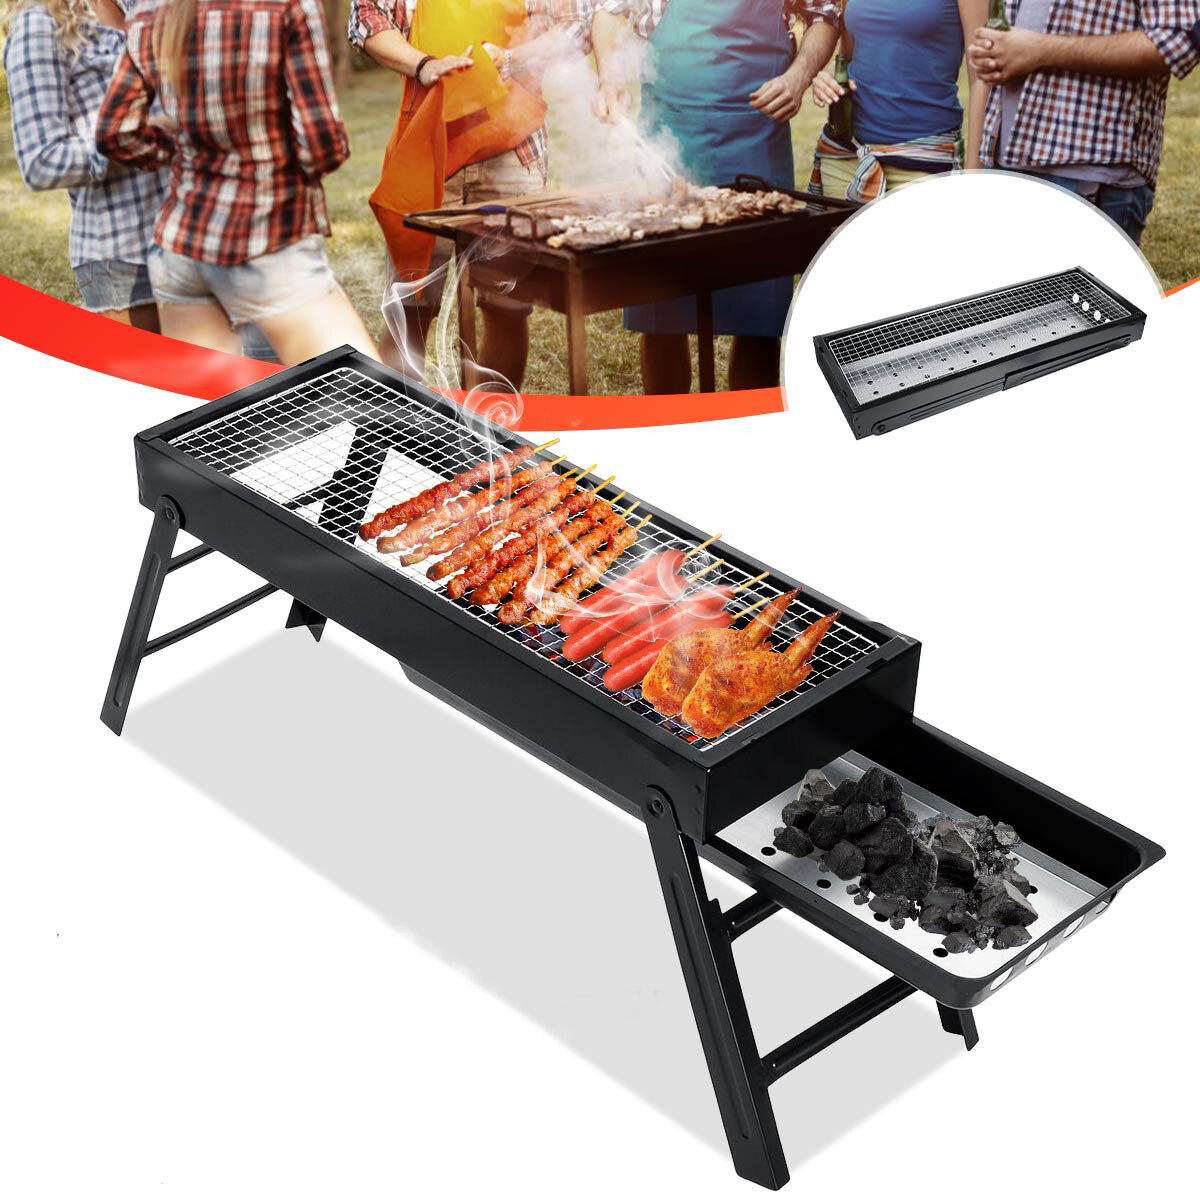 60x23x33cm Iron Folding BBQ Grill Patio Barbecue Charcoal Grill Stove Outdoor Camping Picnic Cooking Tools